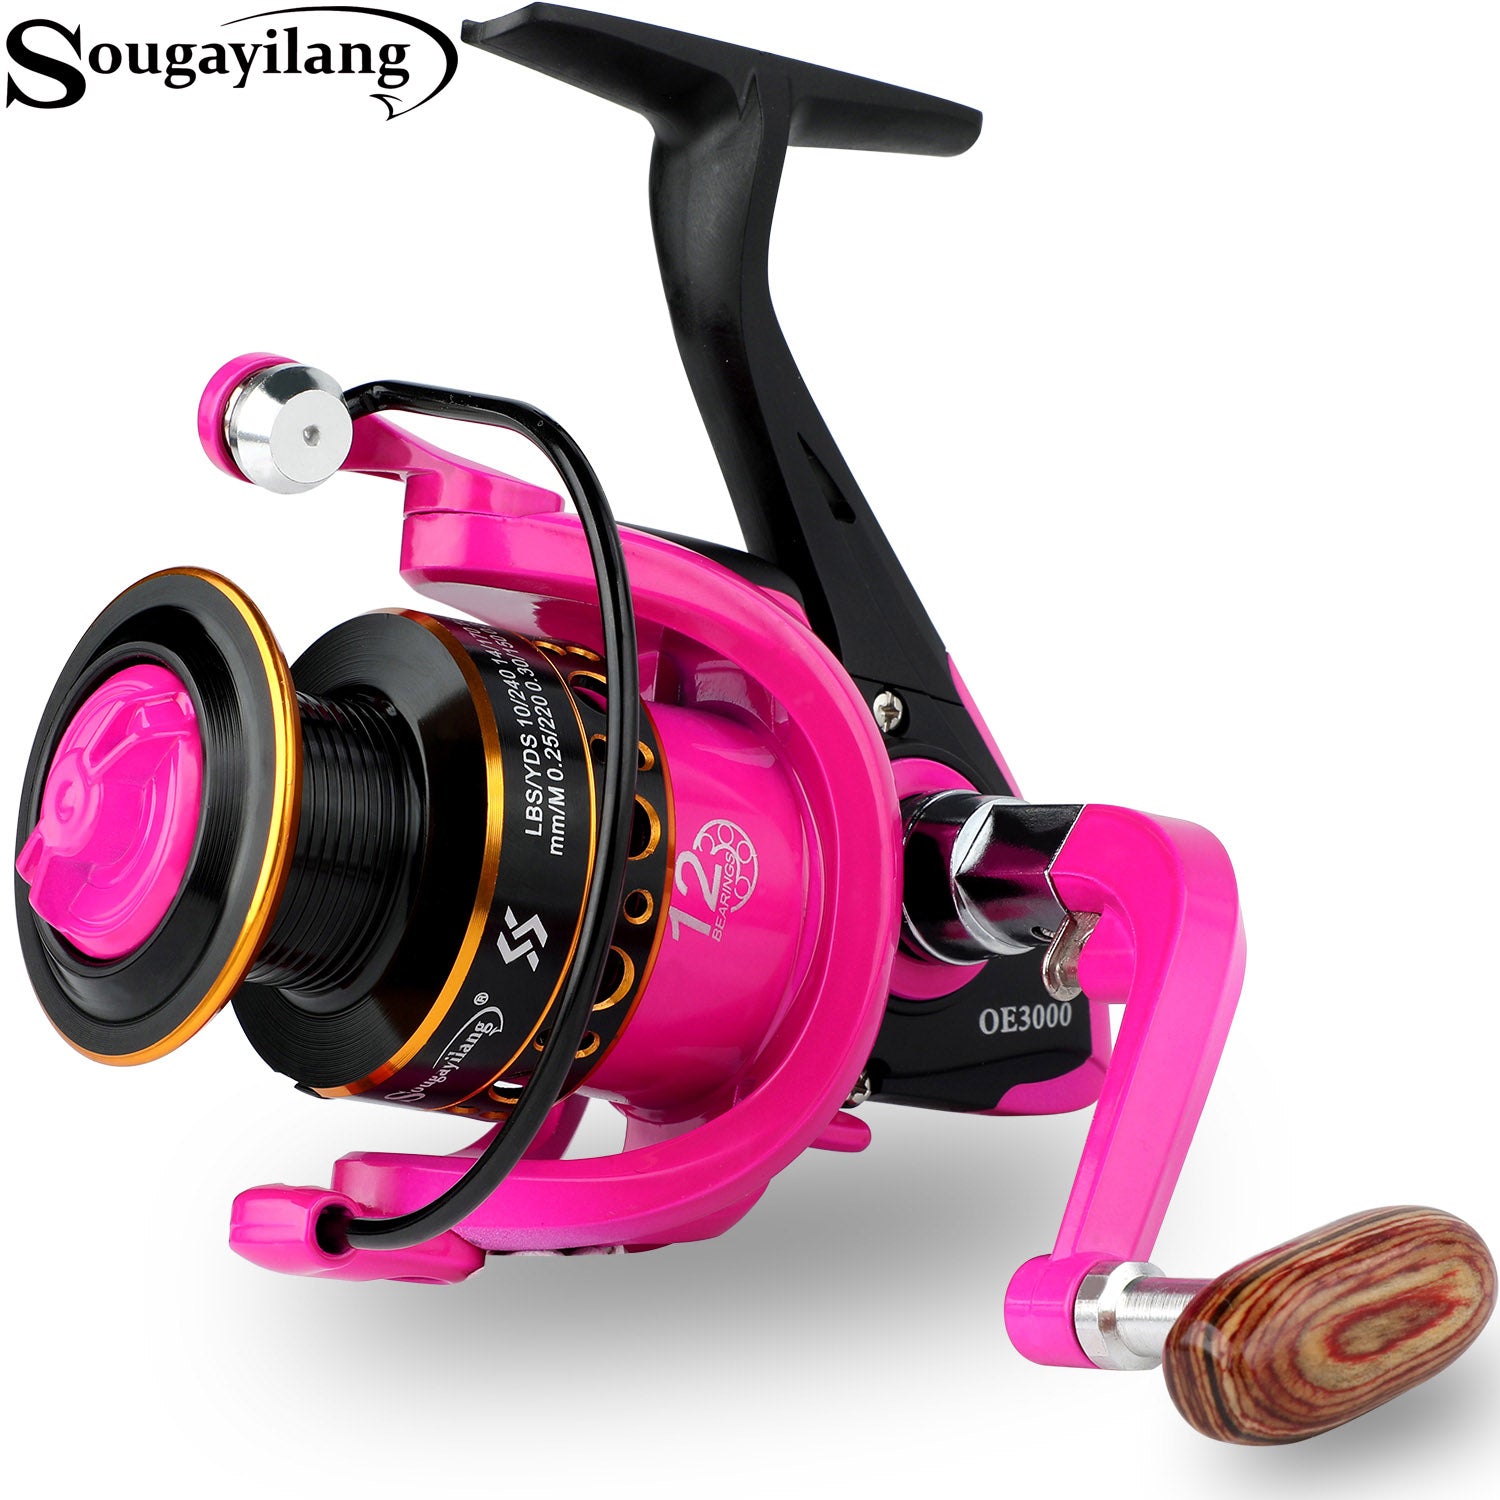  Jopwkuin Fishing Reel Handle, Spiral Dual Interface Lightweight  Aluminum Alloy Fishing Accessory for Maintainence(Pink) : Sports & Outdoors